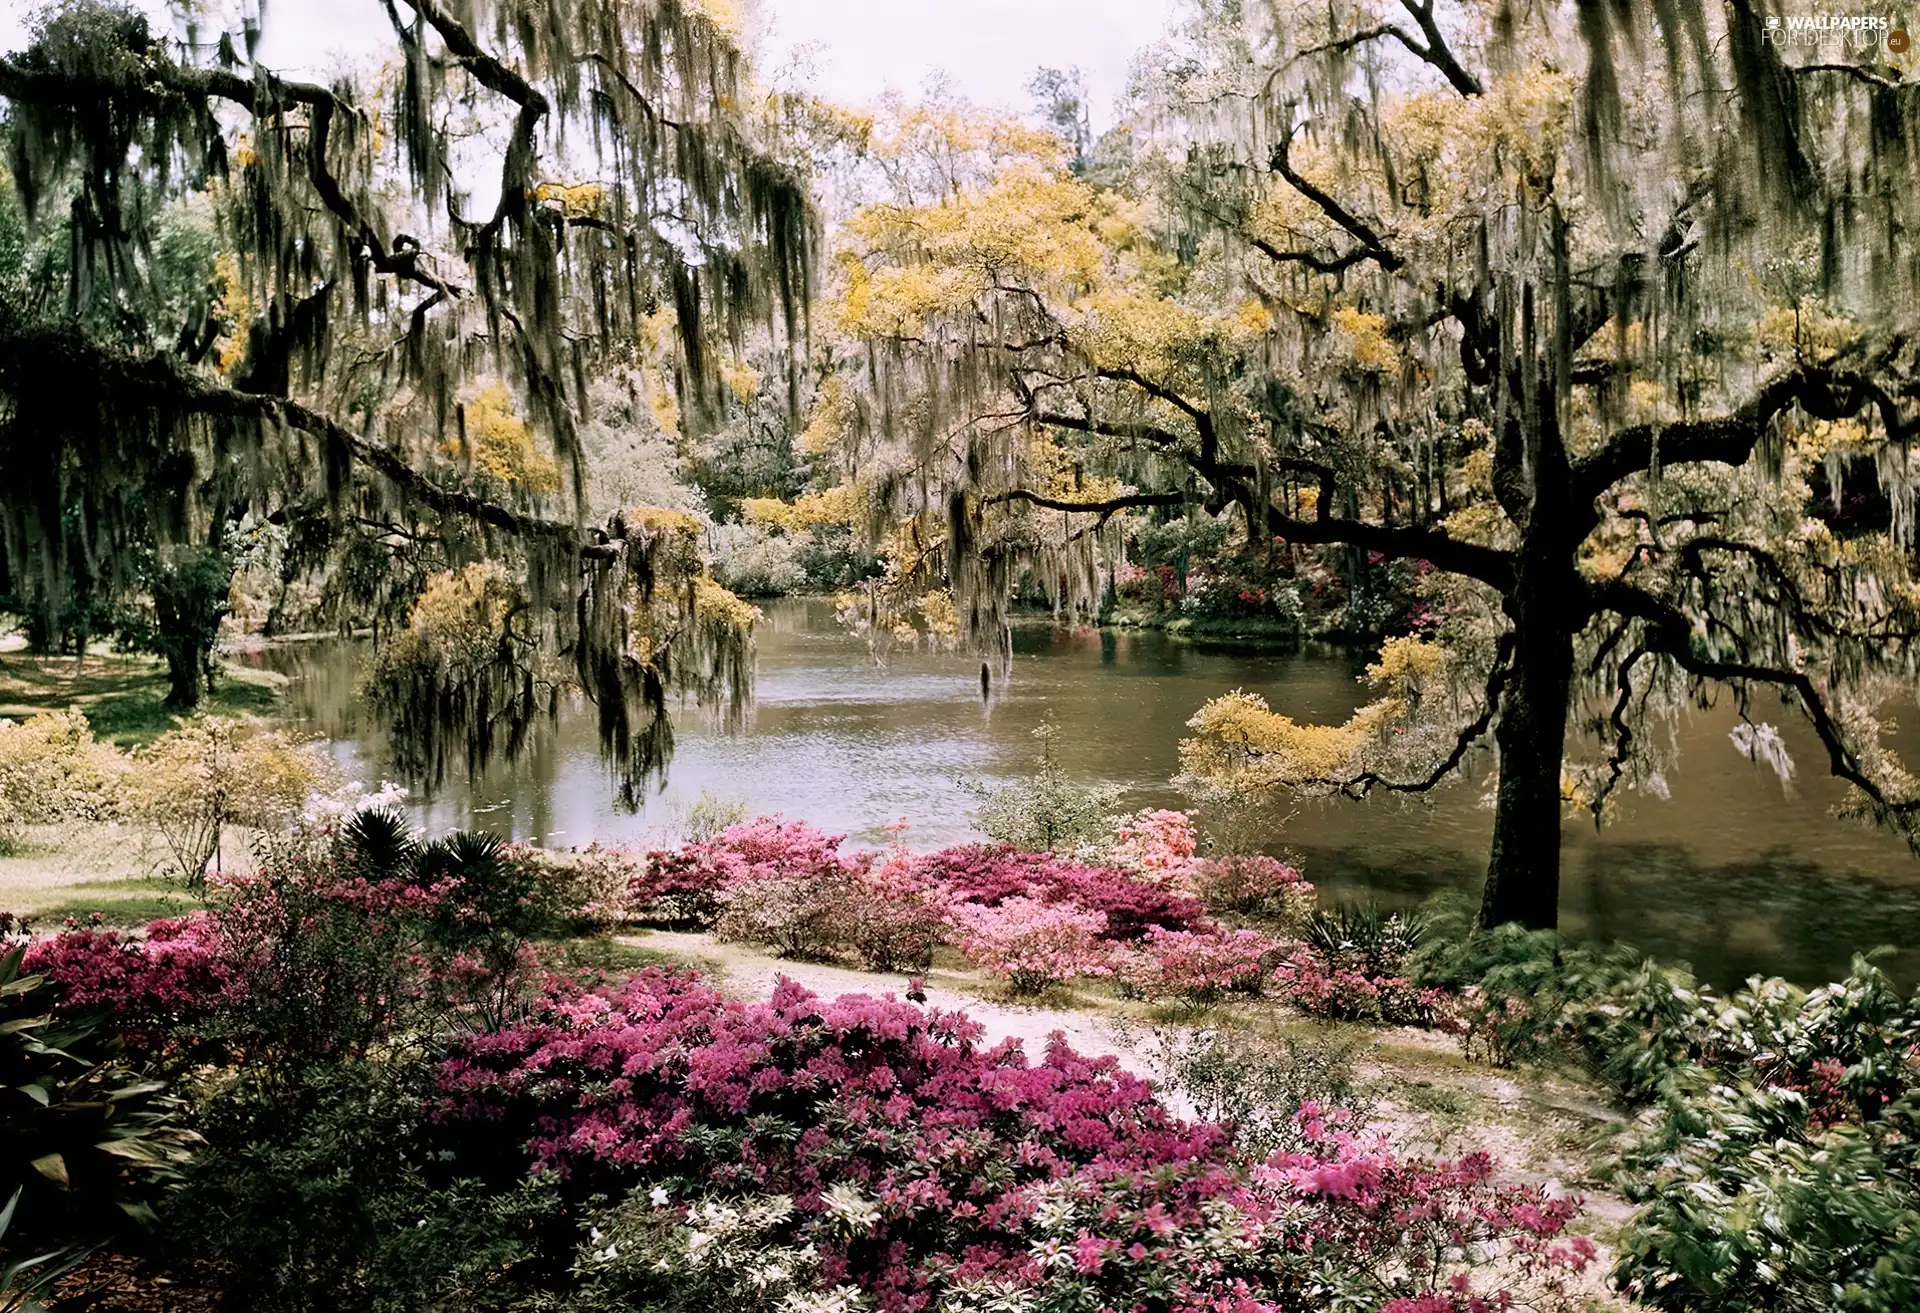 River, viewes, Flowers, trees